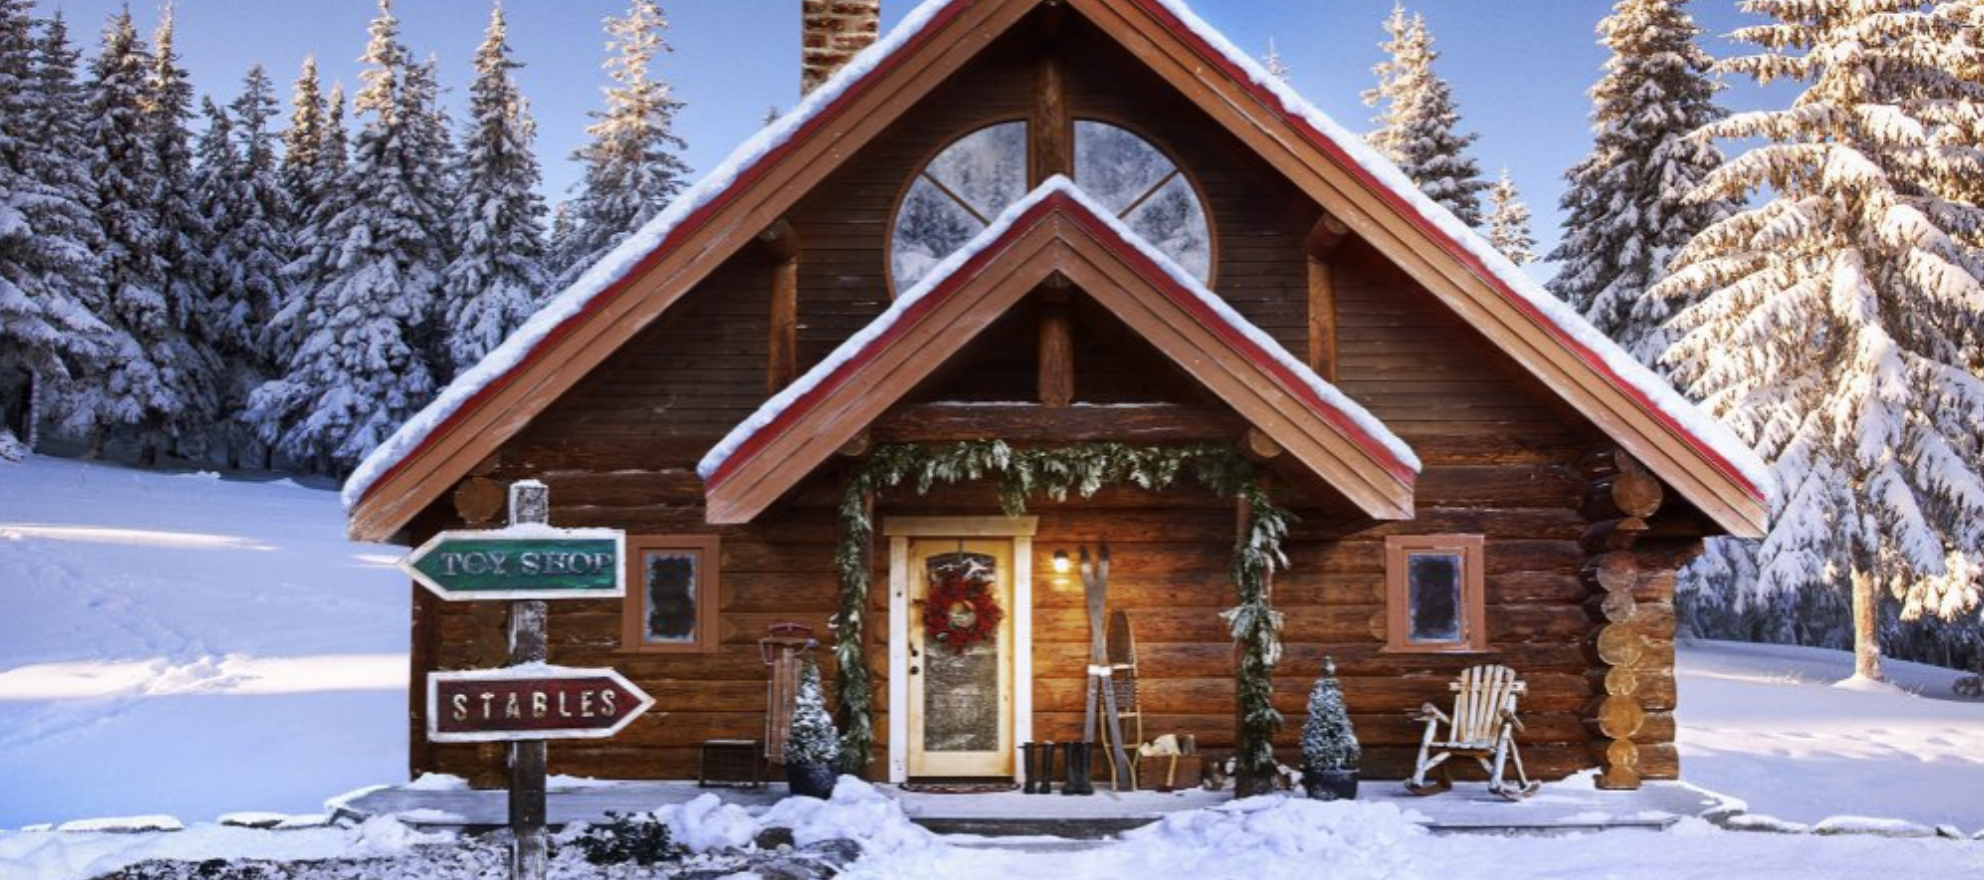 Santa Clause Cabin Zestimate Now At $764K